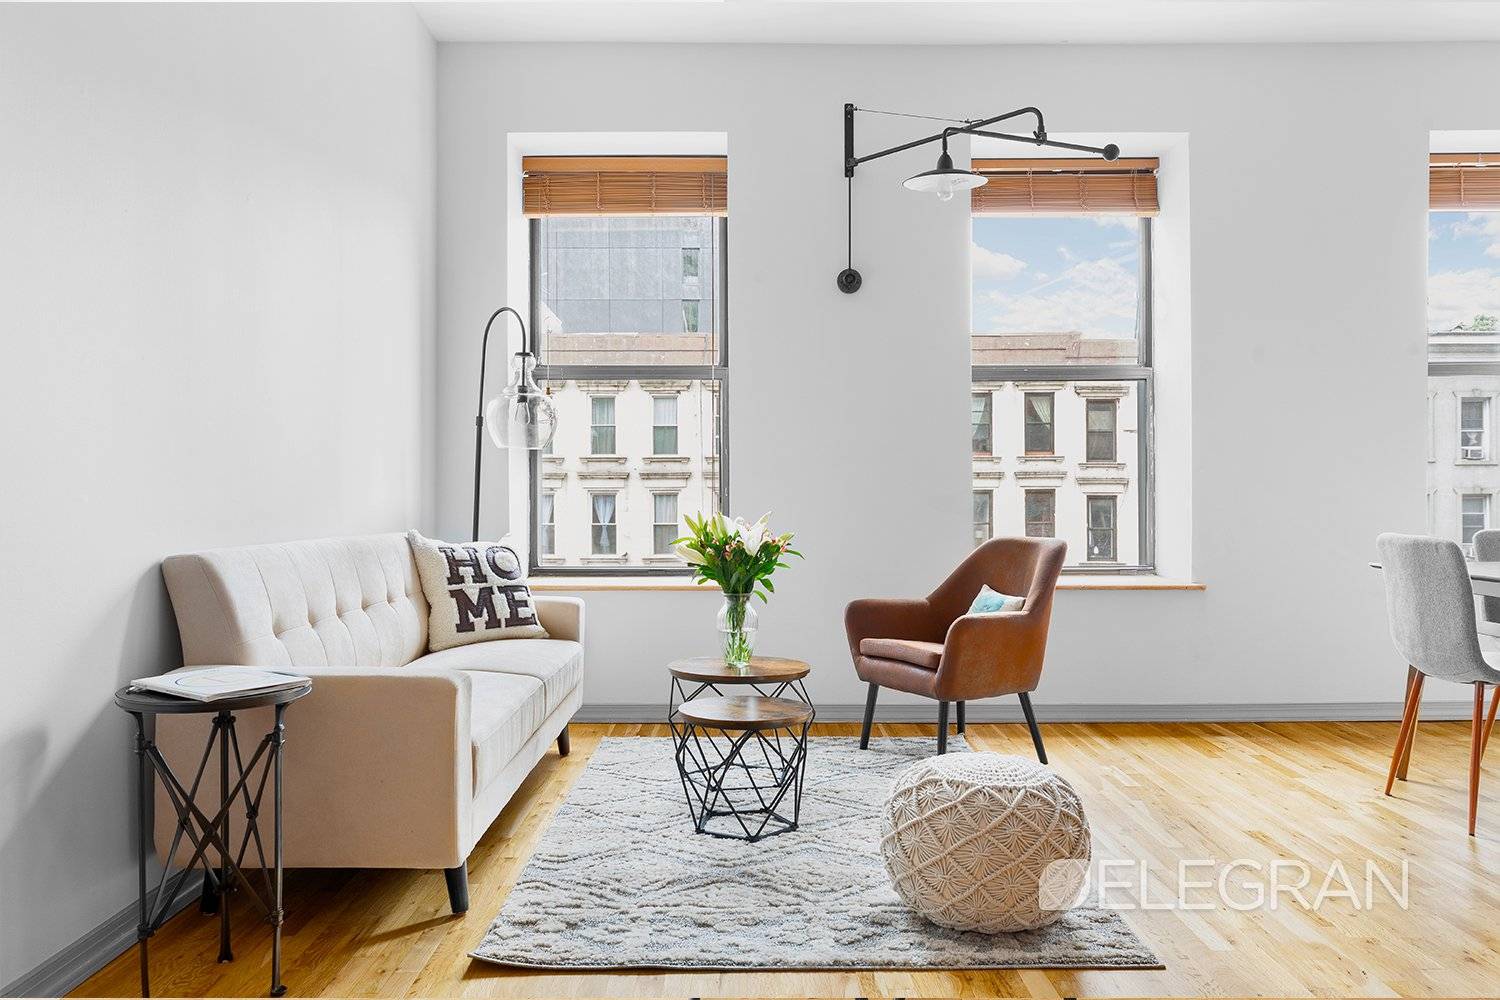 At the iconic address mentioned in Jay Z s Empire State of Mind, this duplex is located in the lovely Boerum Hill neighborhood.